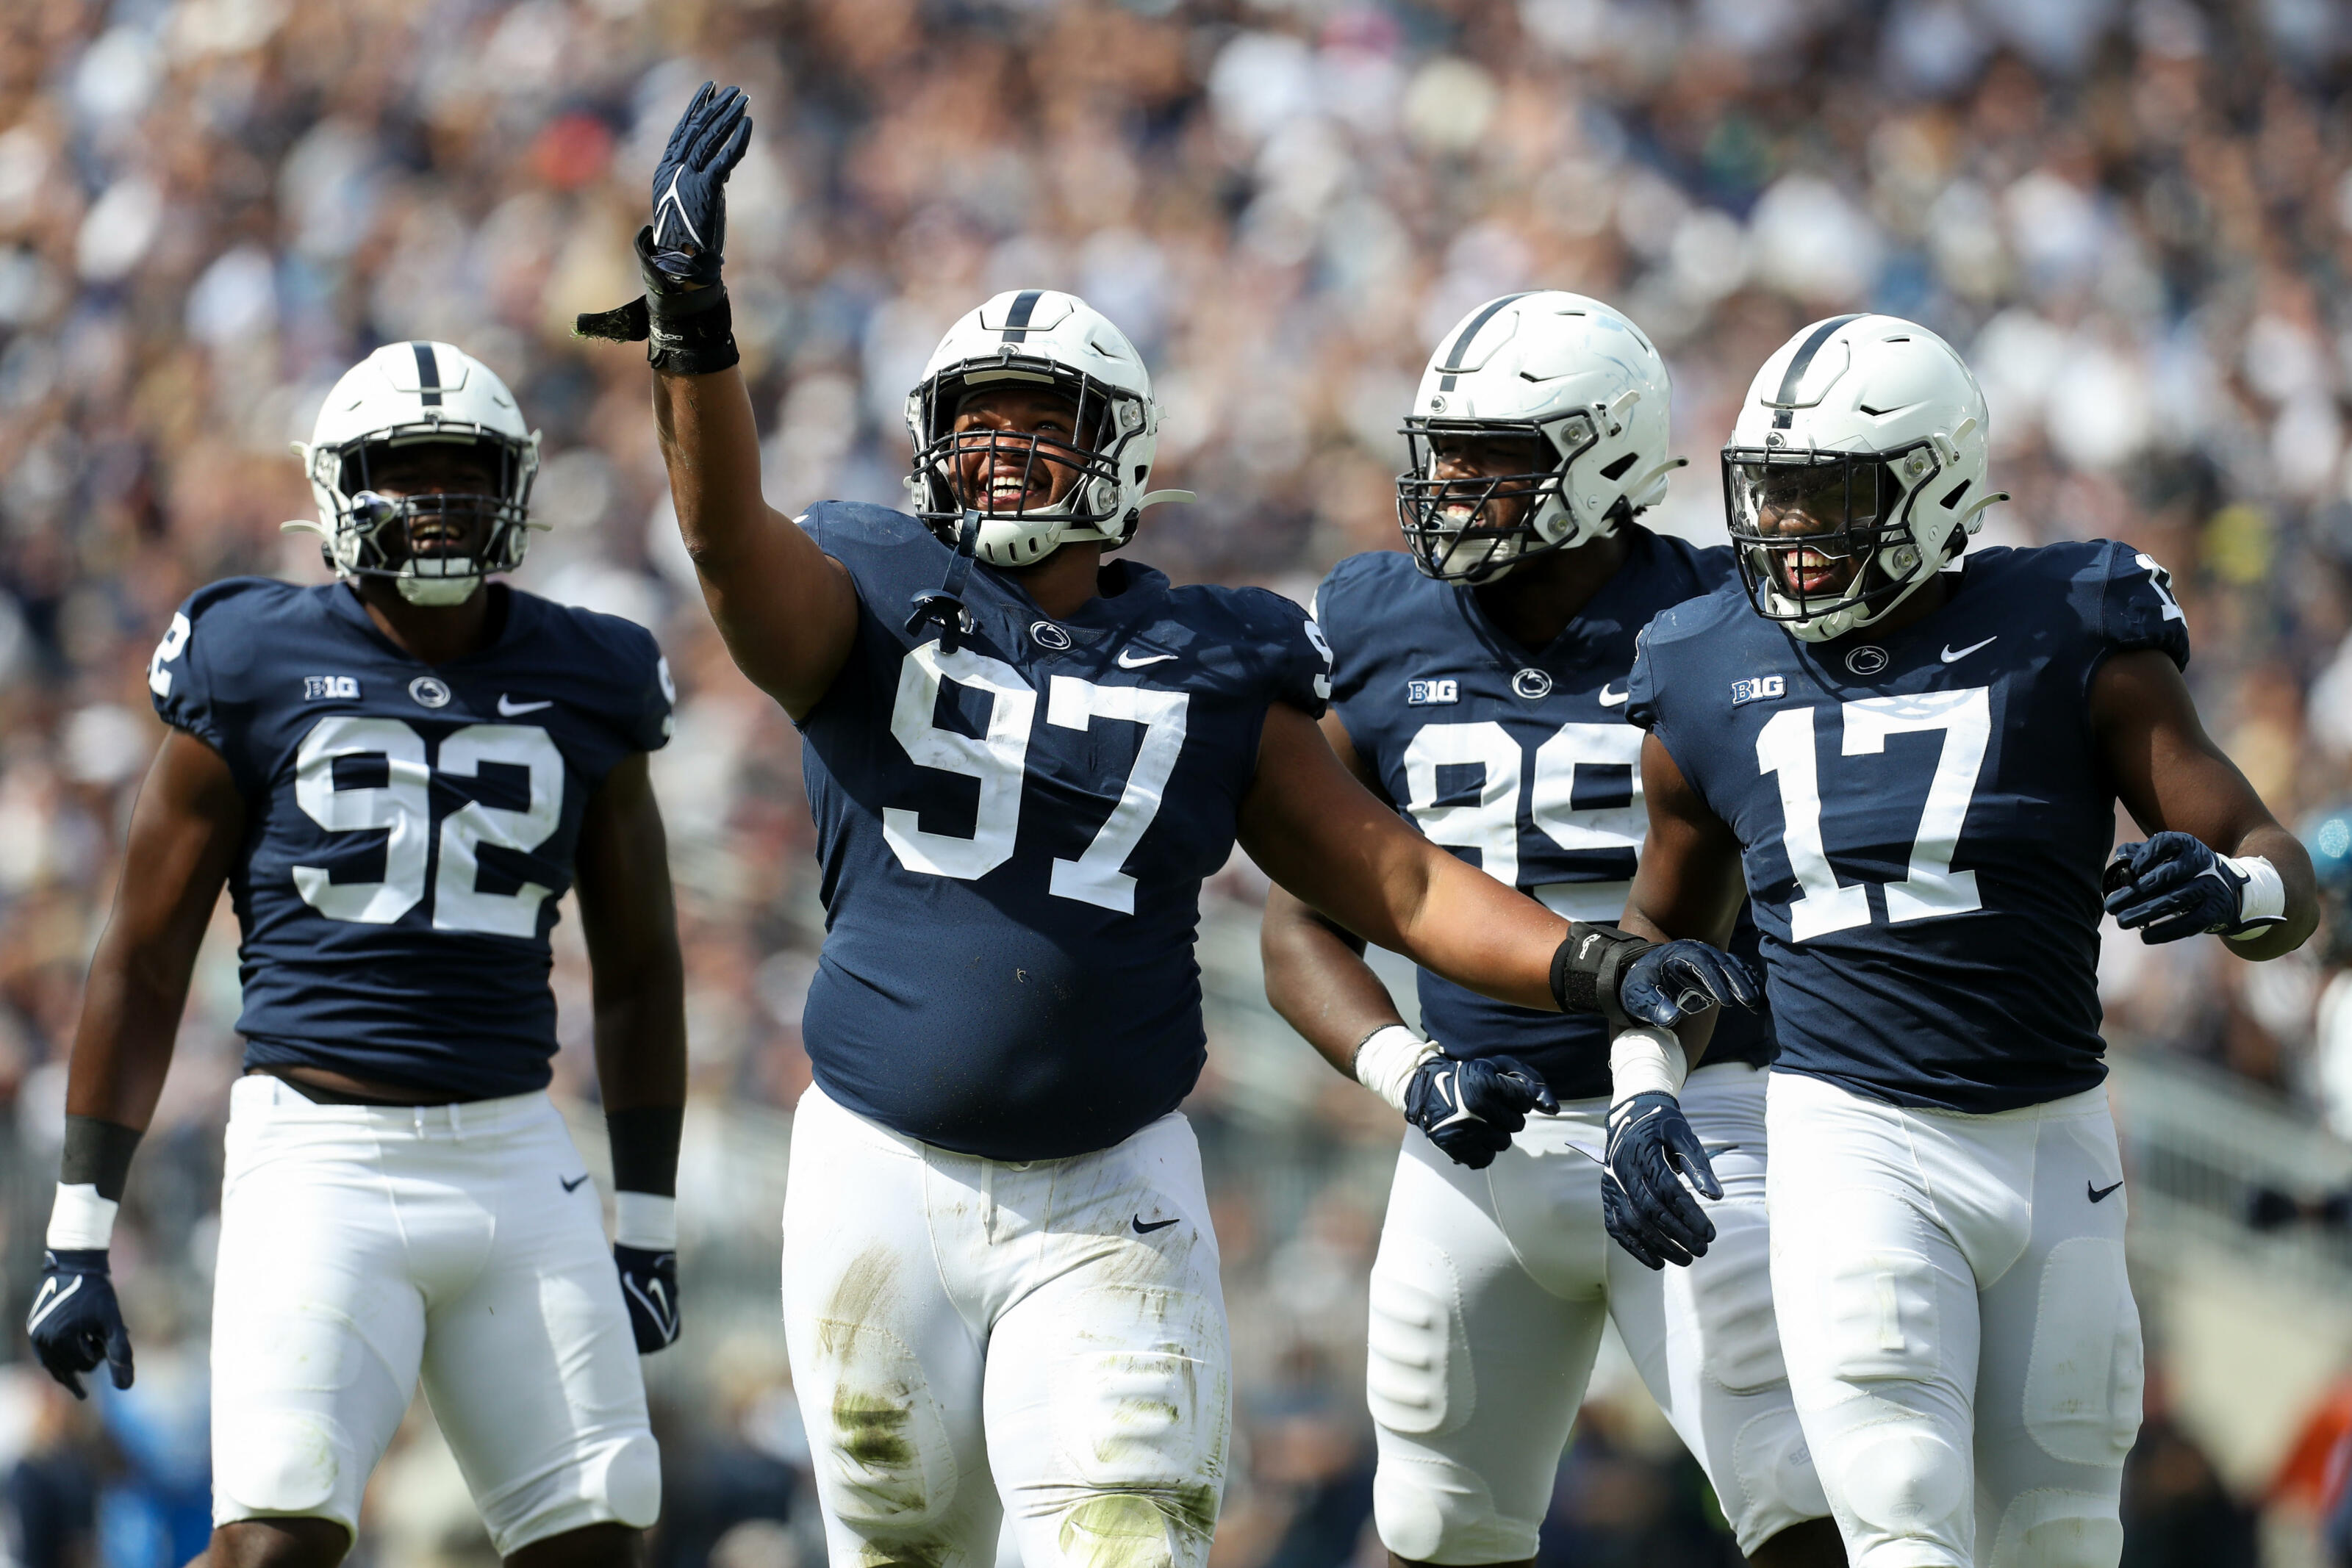 Penn State Game Saturday Penn State vs Indiana Hoosiers Odds, Injury Report, Prediction, Schedule, Live Stream and TV Channel for Week 5 College Football Game